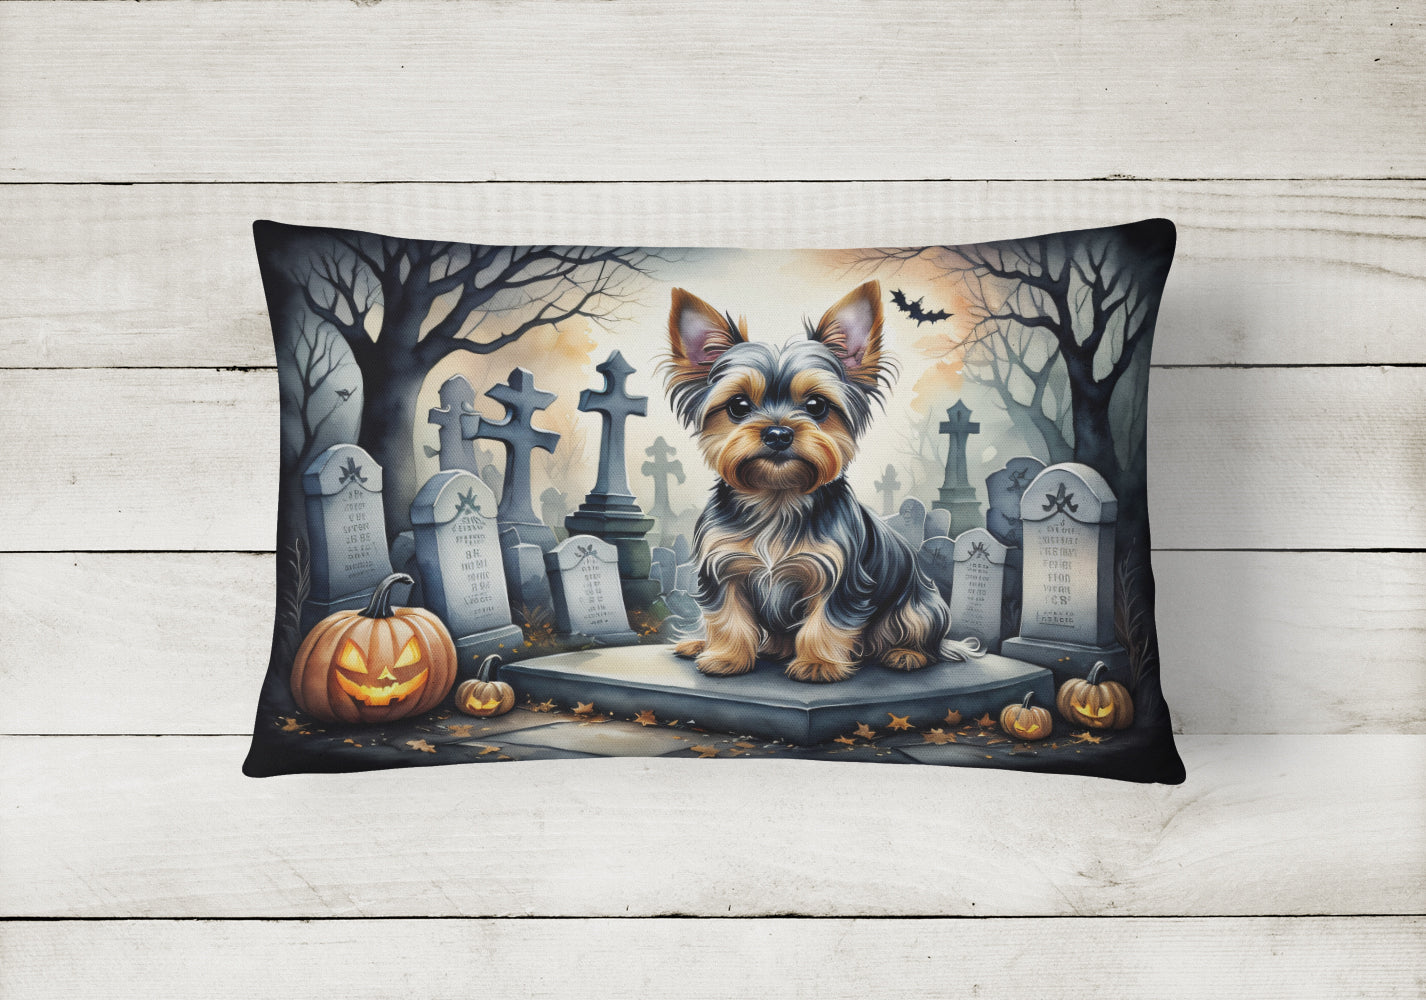 Buy this Yorkshire Terrier Spooky Halloween Fabric Decorative Pillow